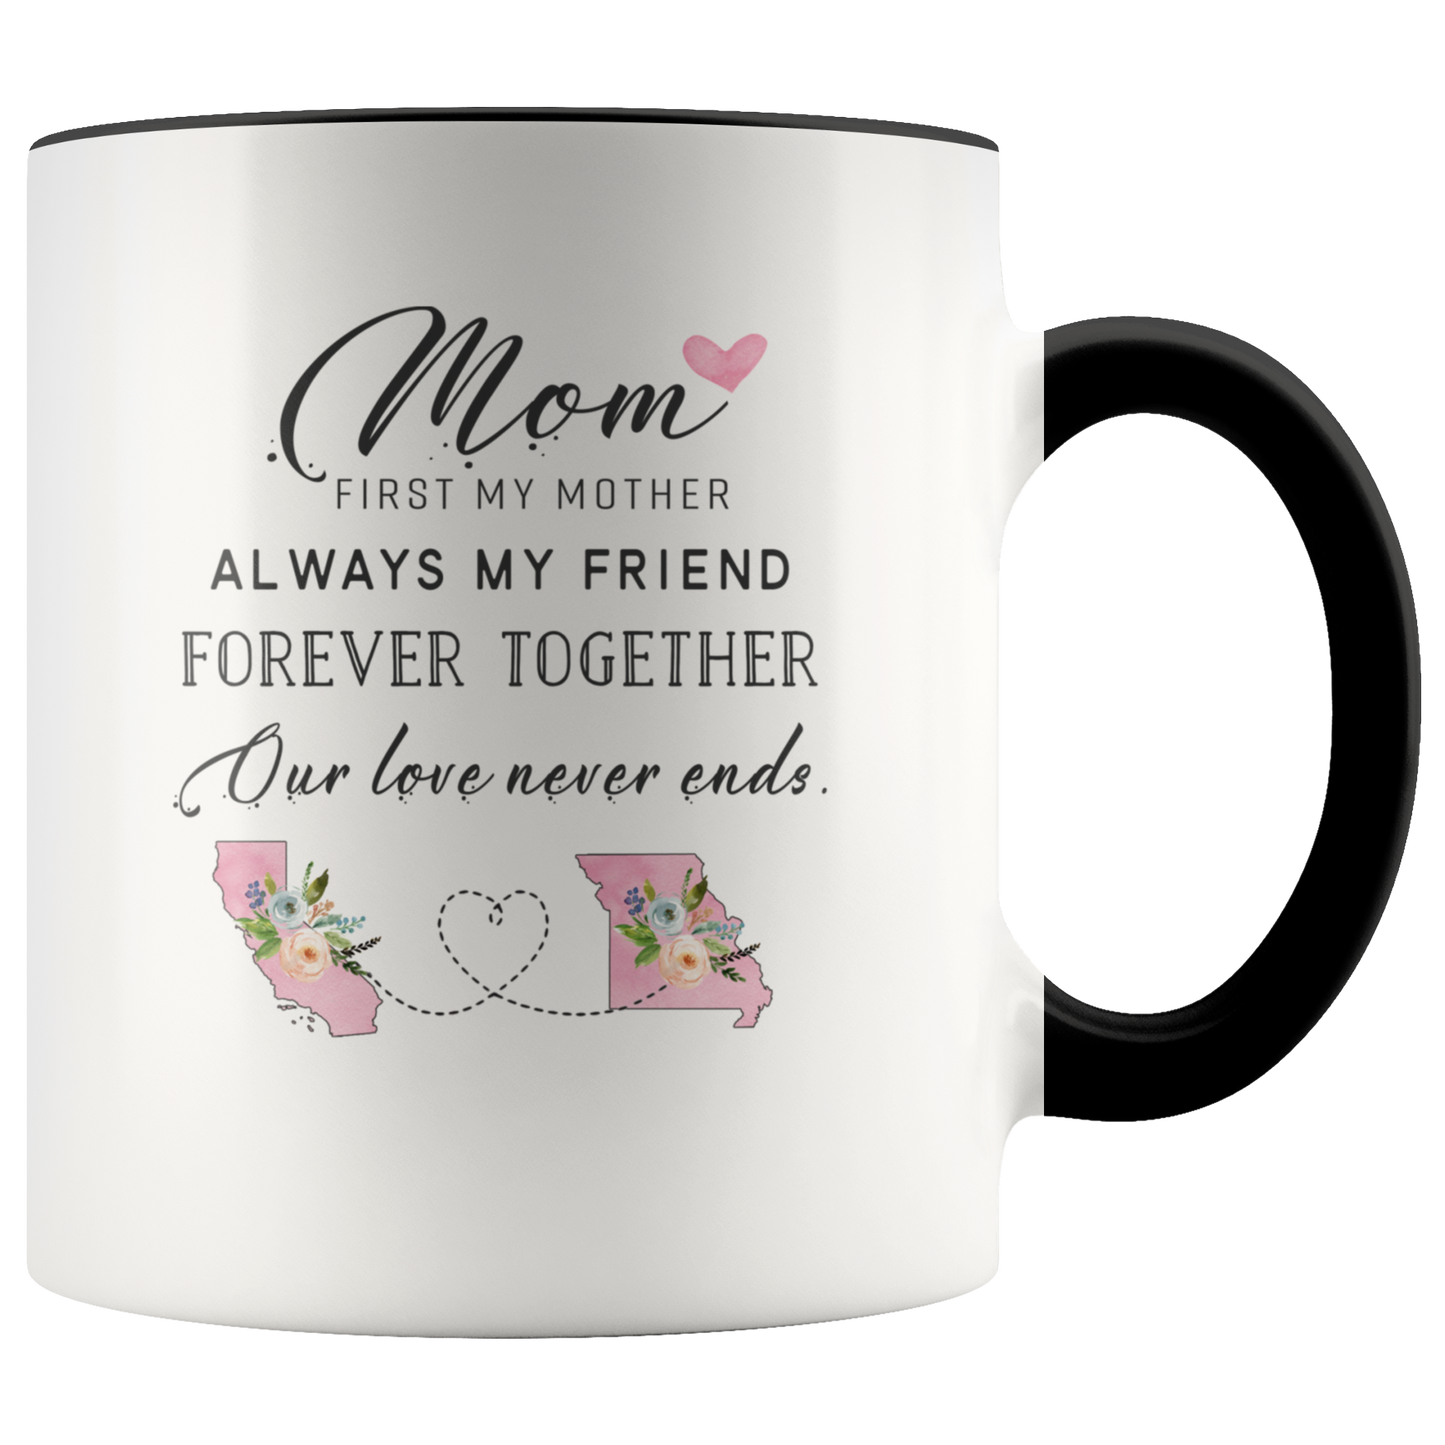 ND-21358810-sp-23735 - [ California | Missouri ]Mothers Day Accent Mug Red - Mom, First My Mother Always My